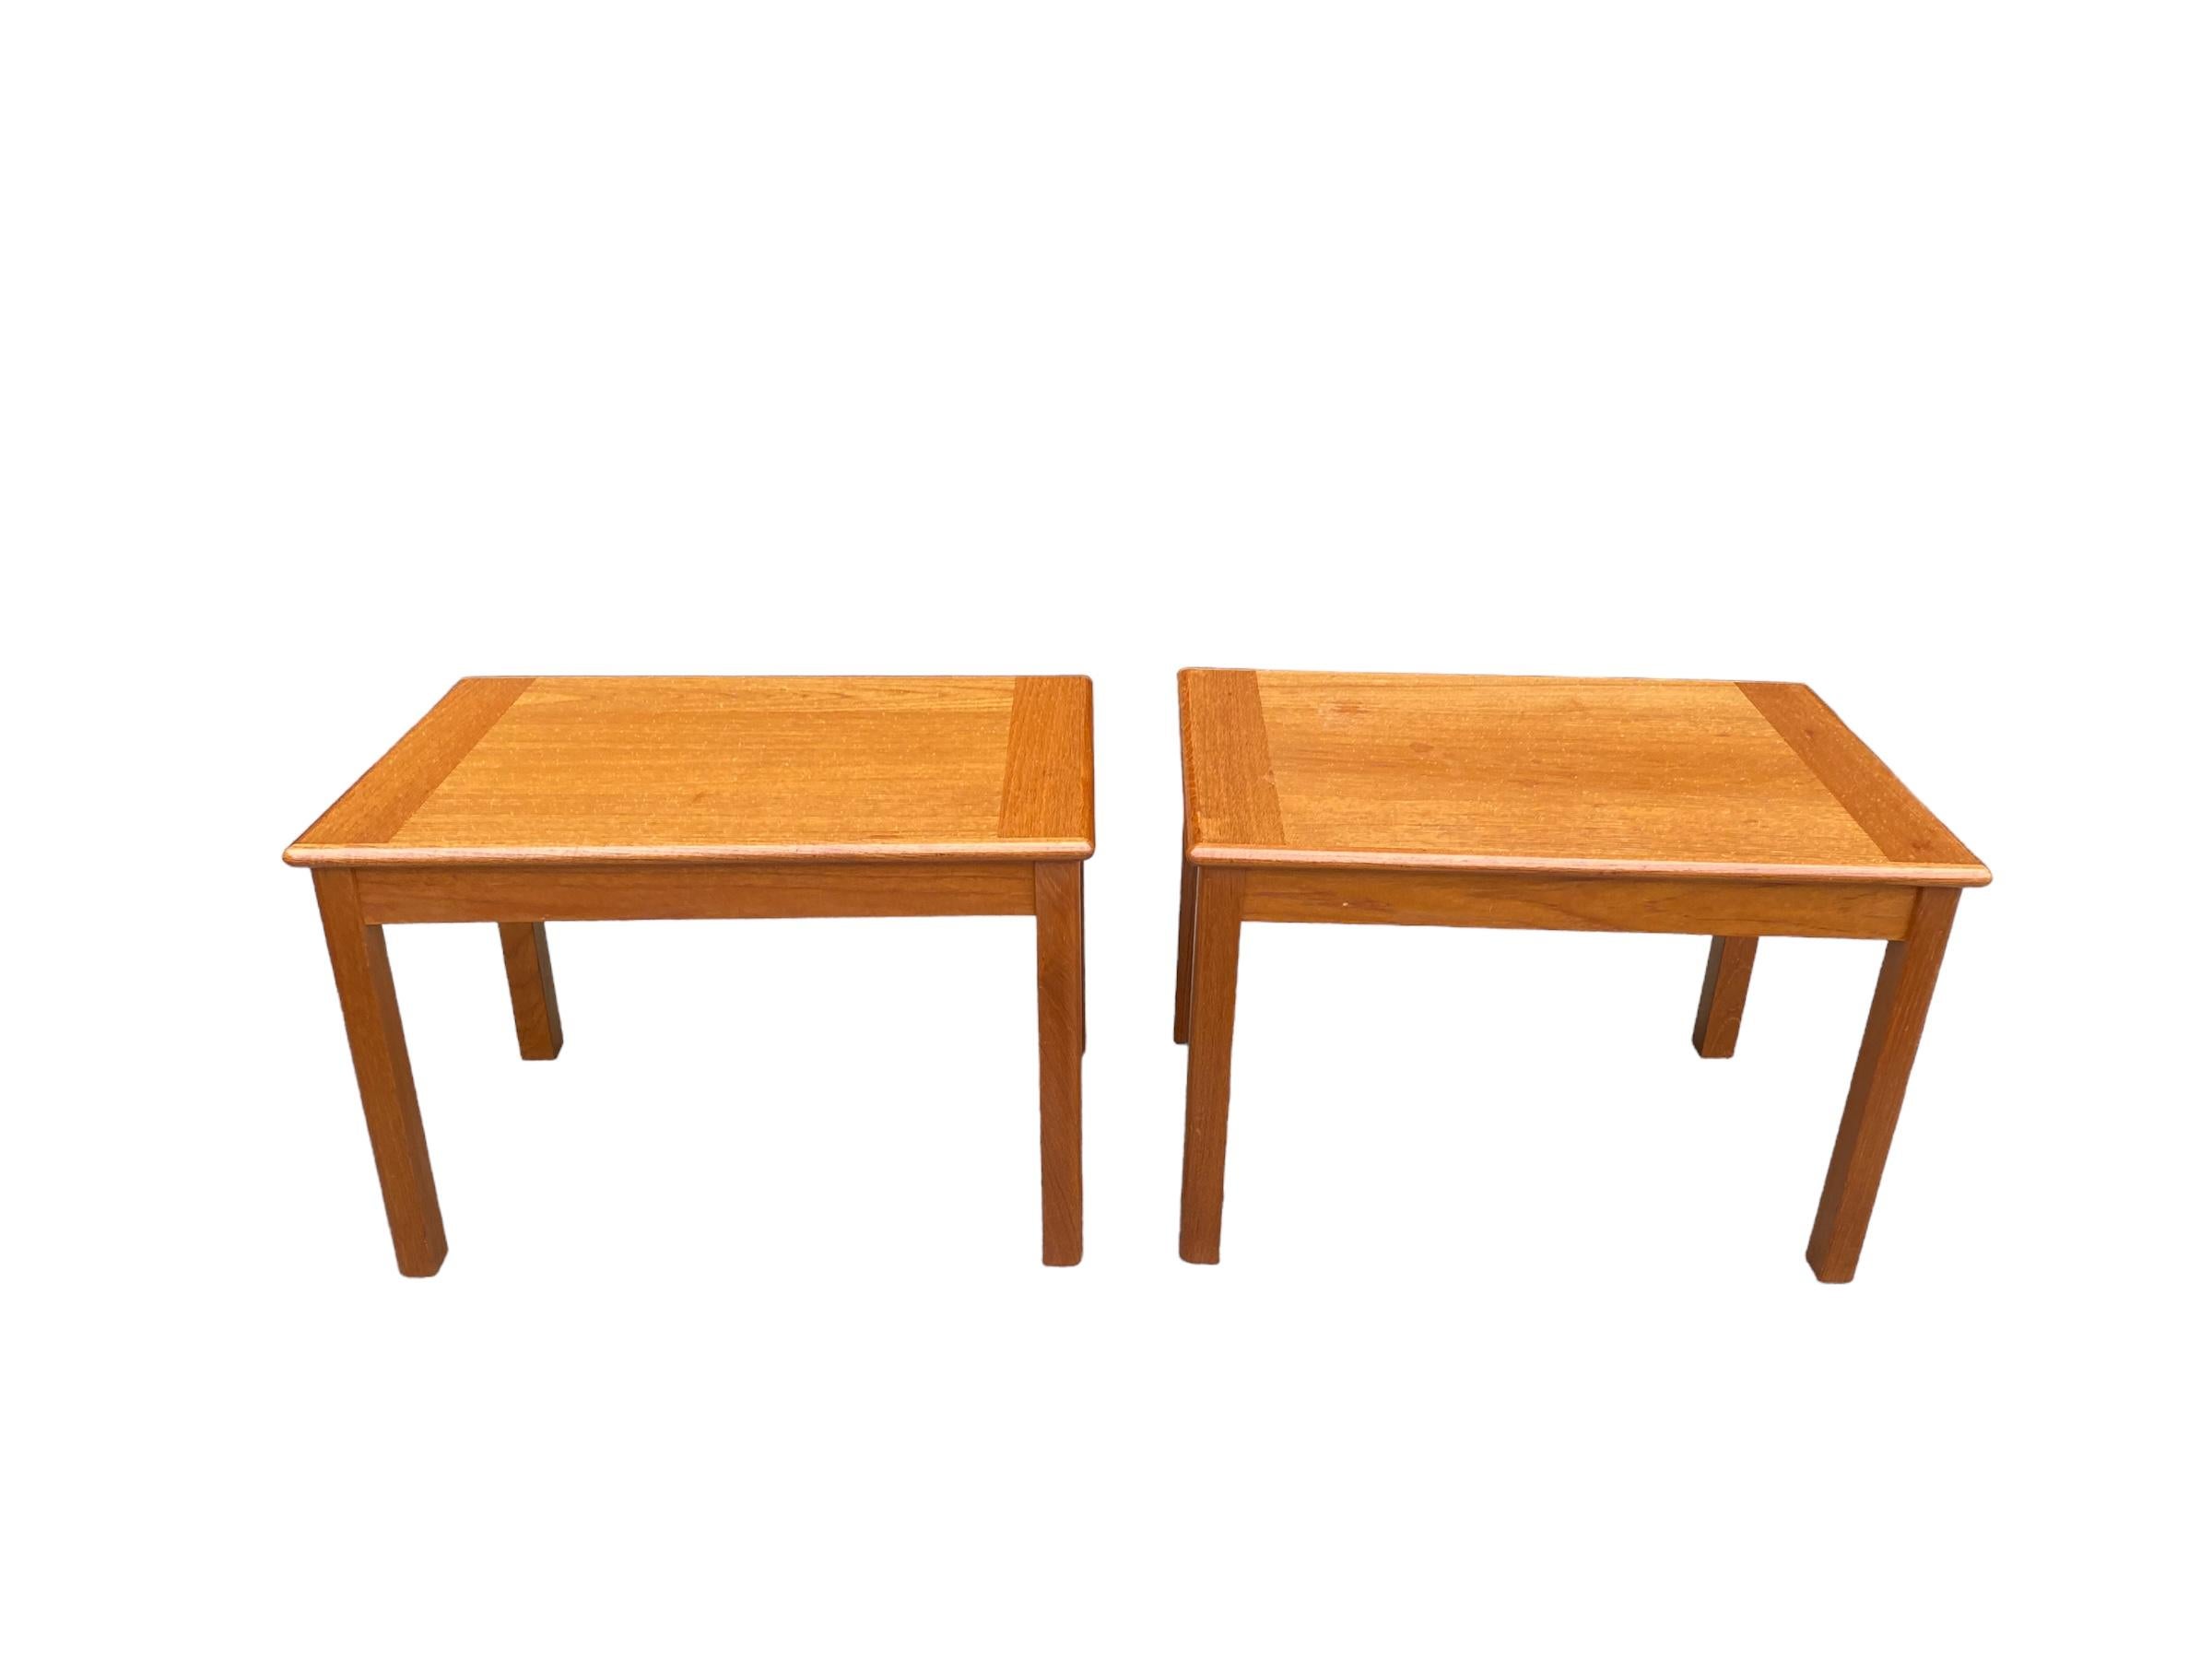 20th Century Danish Modern Teak End Tables by Domino Mobler